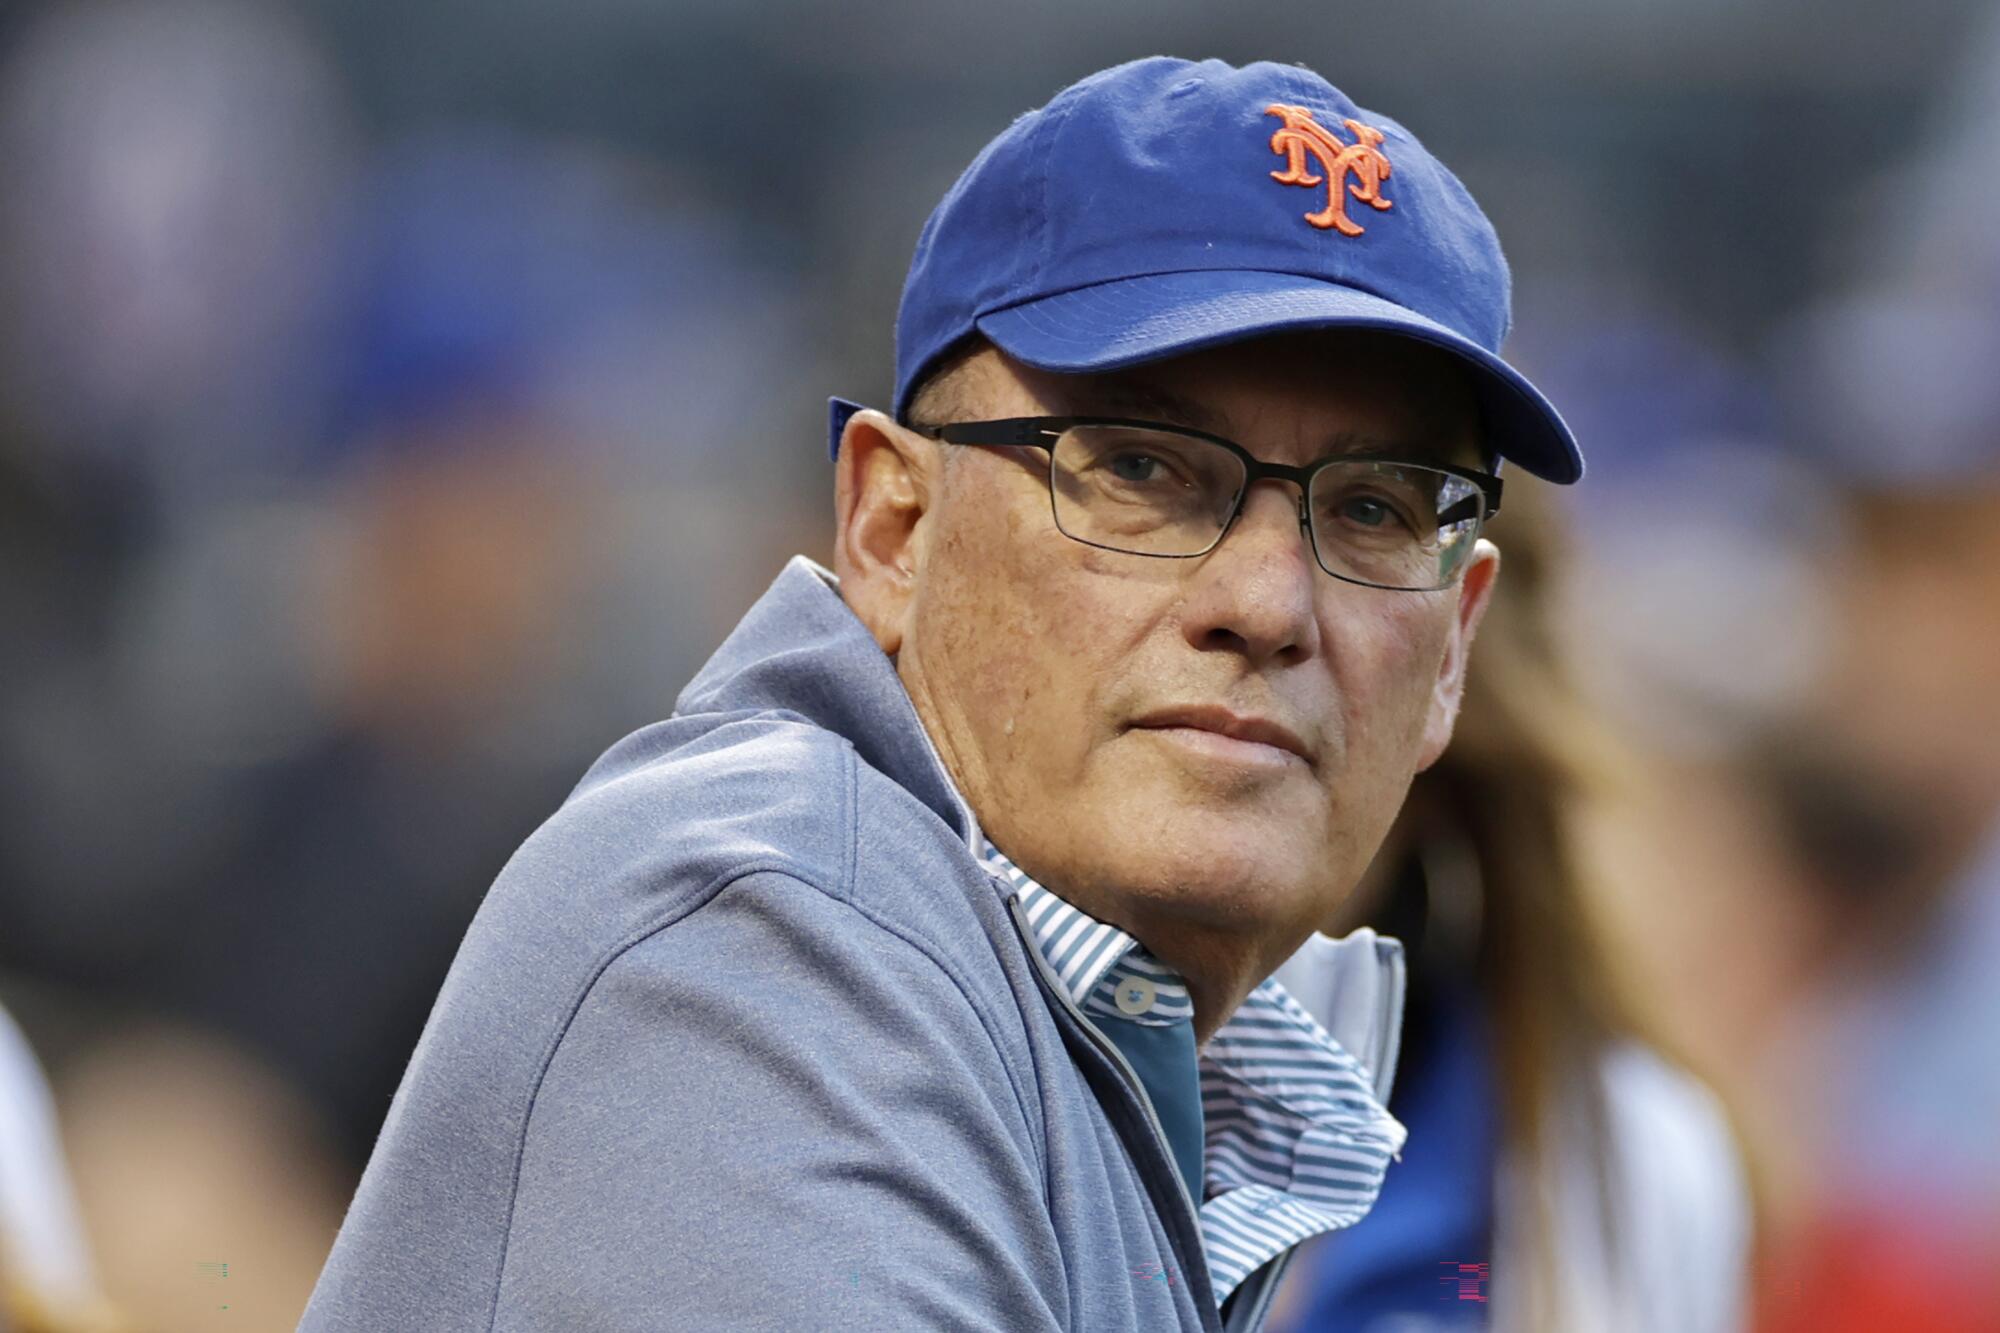 New York Mets owner Steve Cohen waits before a game between the Dodgers and Mets at Citi Field in New York.